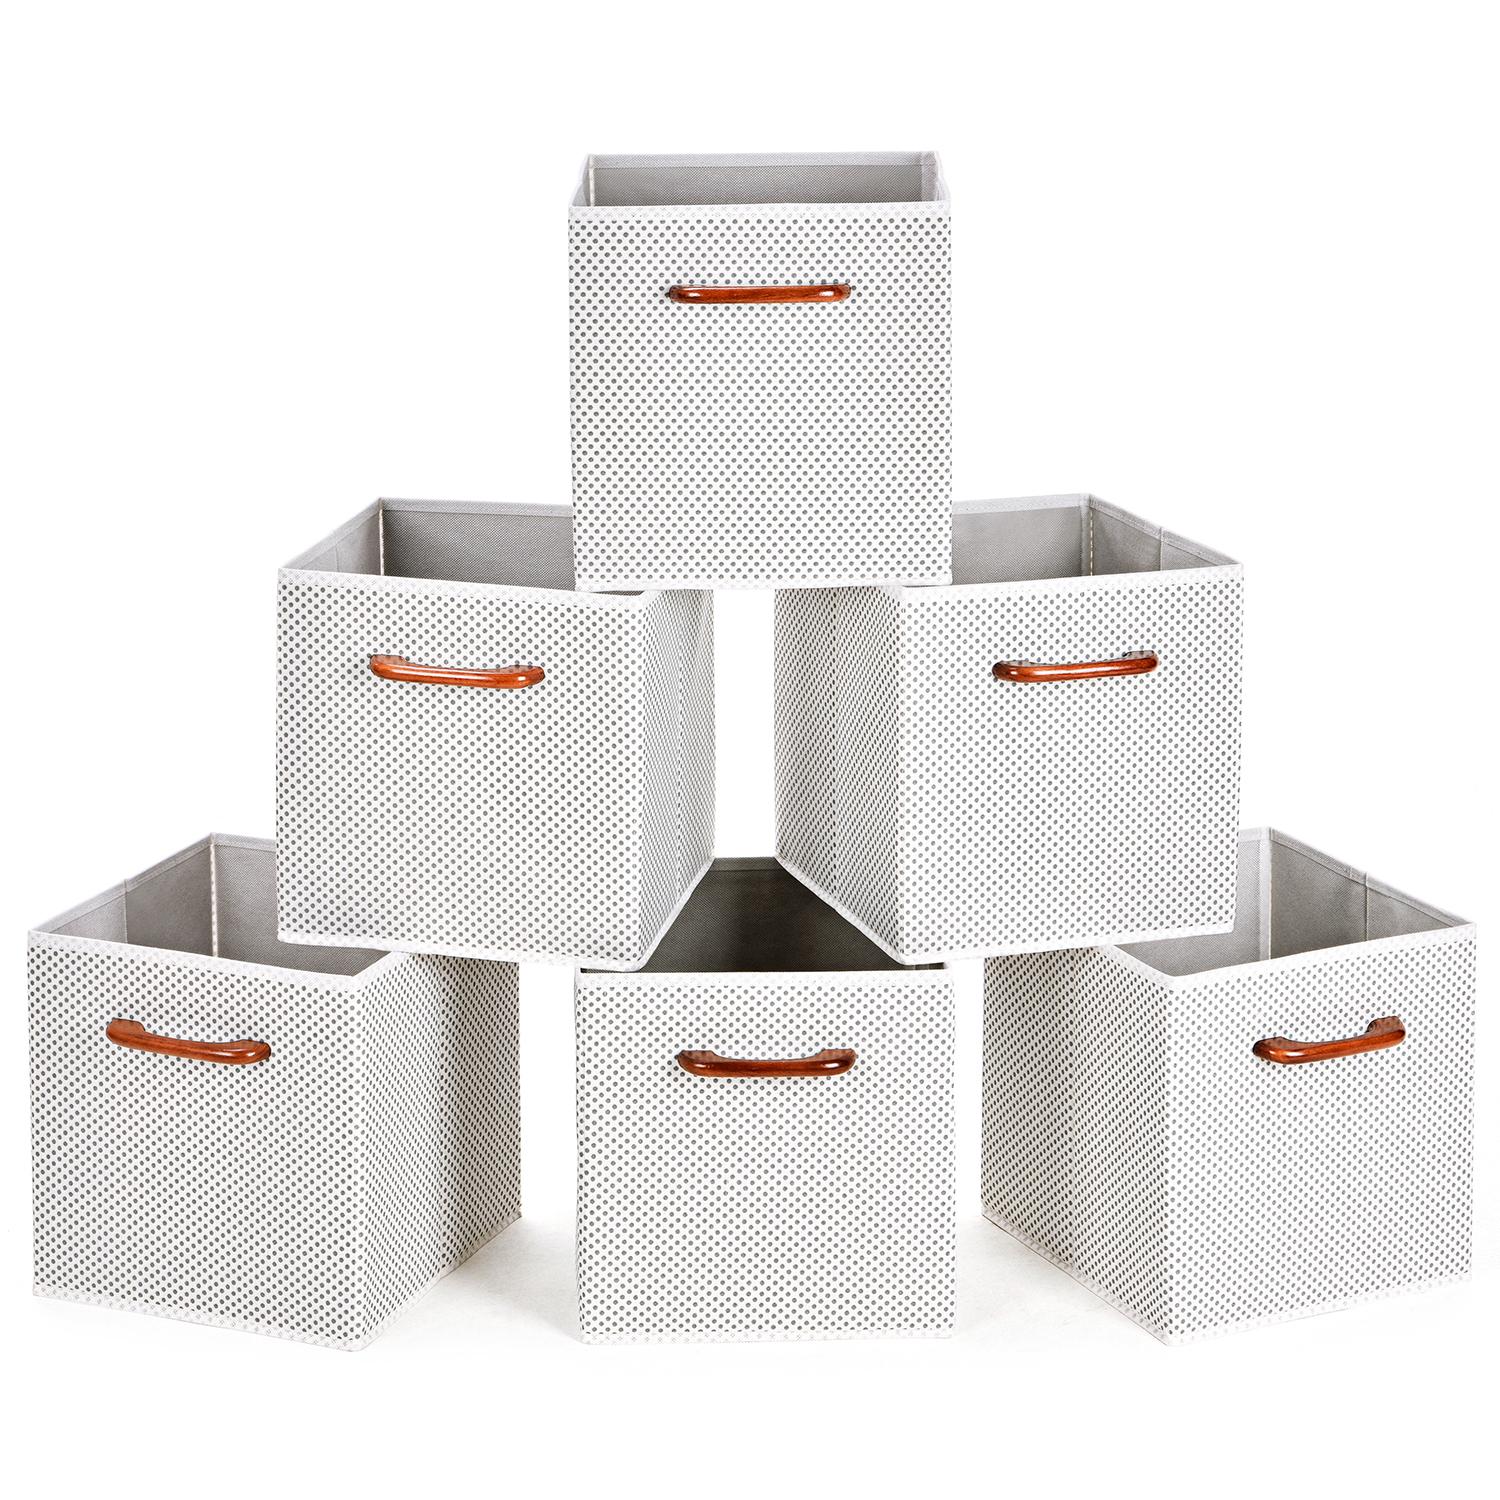 Collapsible Storage Cubes Maidmax Set Of 6 Foldable Fabric Storage intended for size 1500 X 1500